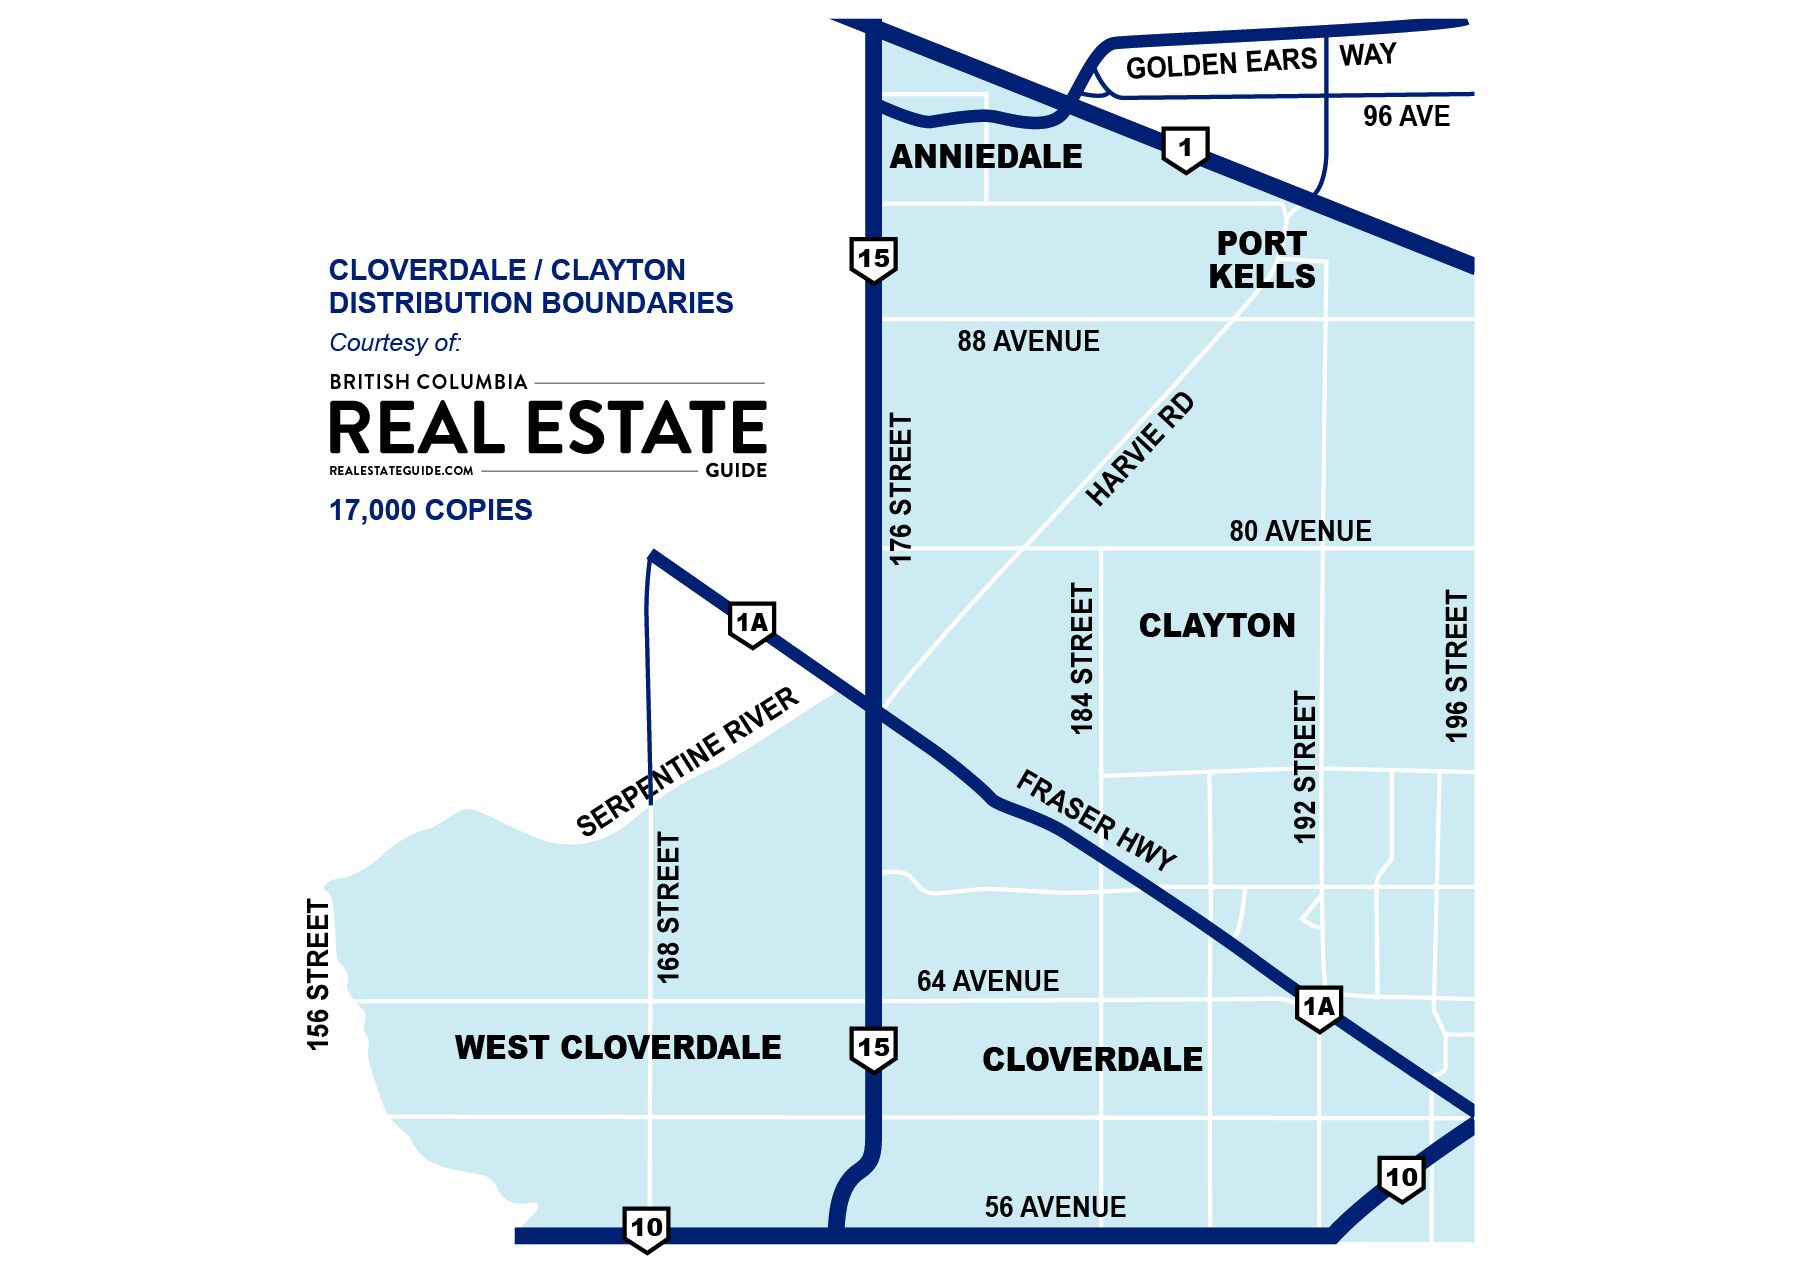 Cloverdale / Clayton Real Estate Guide Map